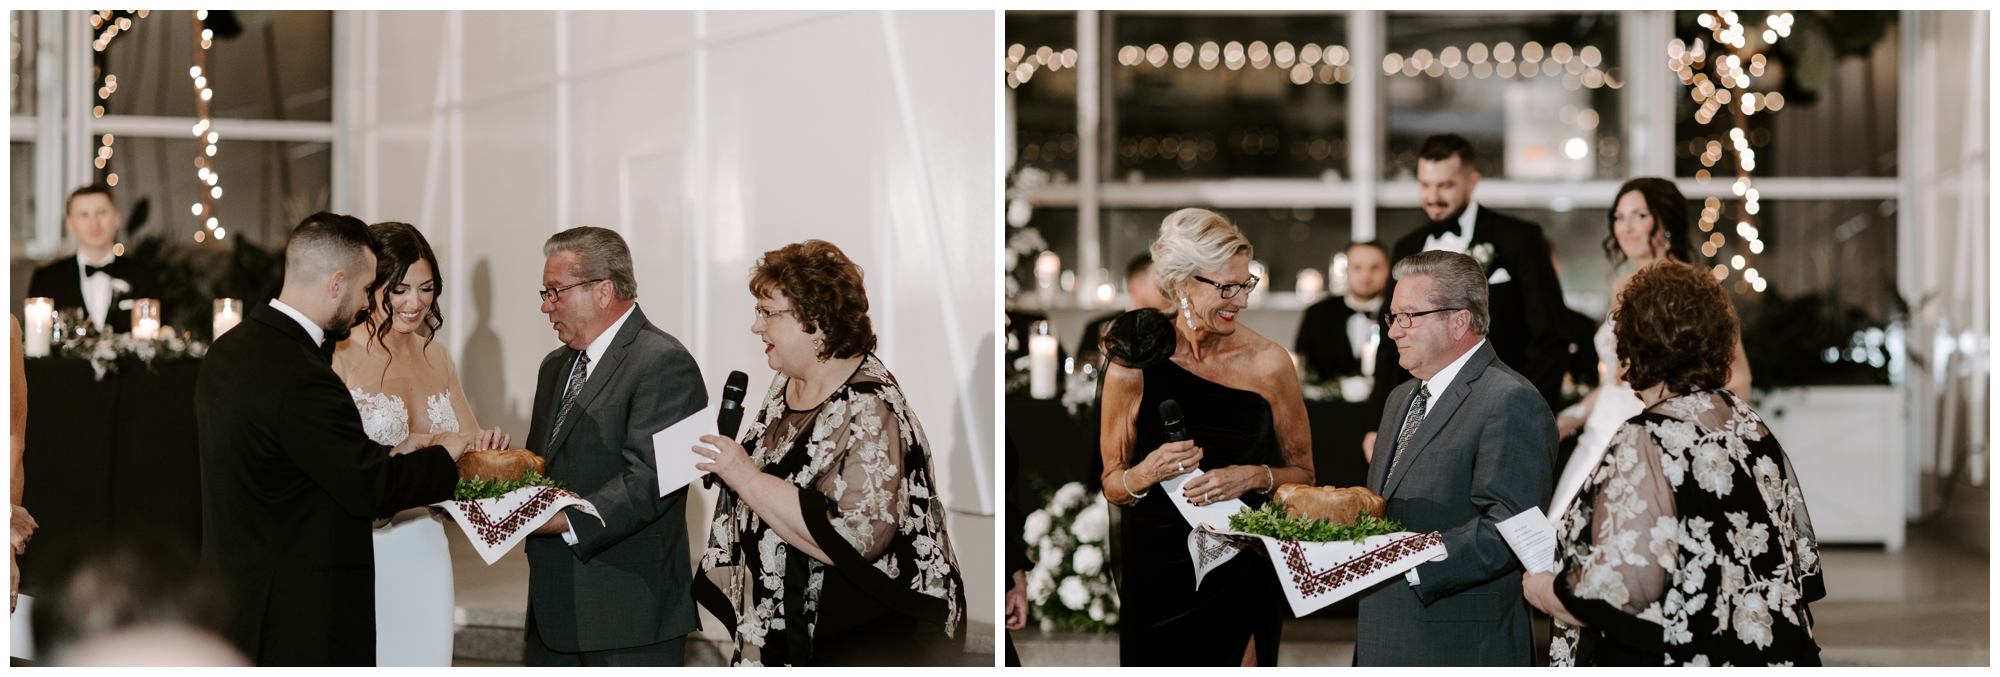 Wintergarden at PPG Place; wedding photographed by Mariah Treiber Photography